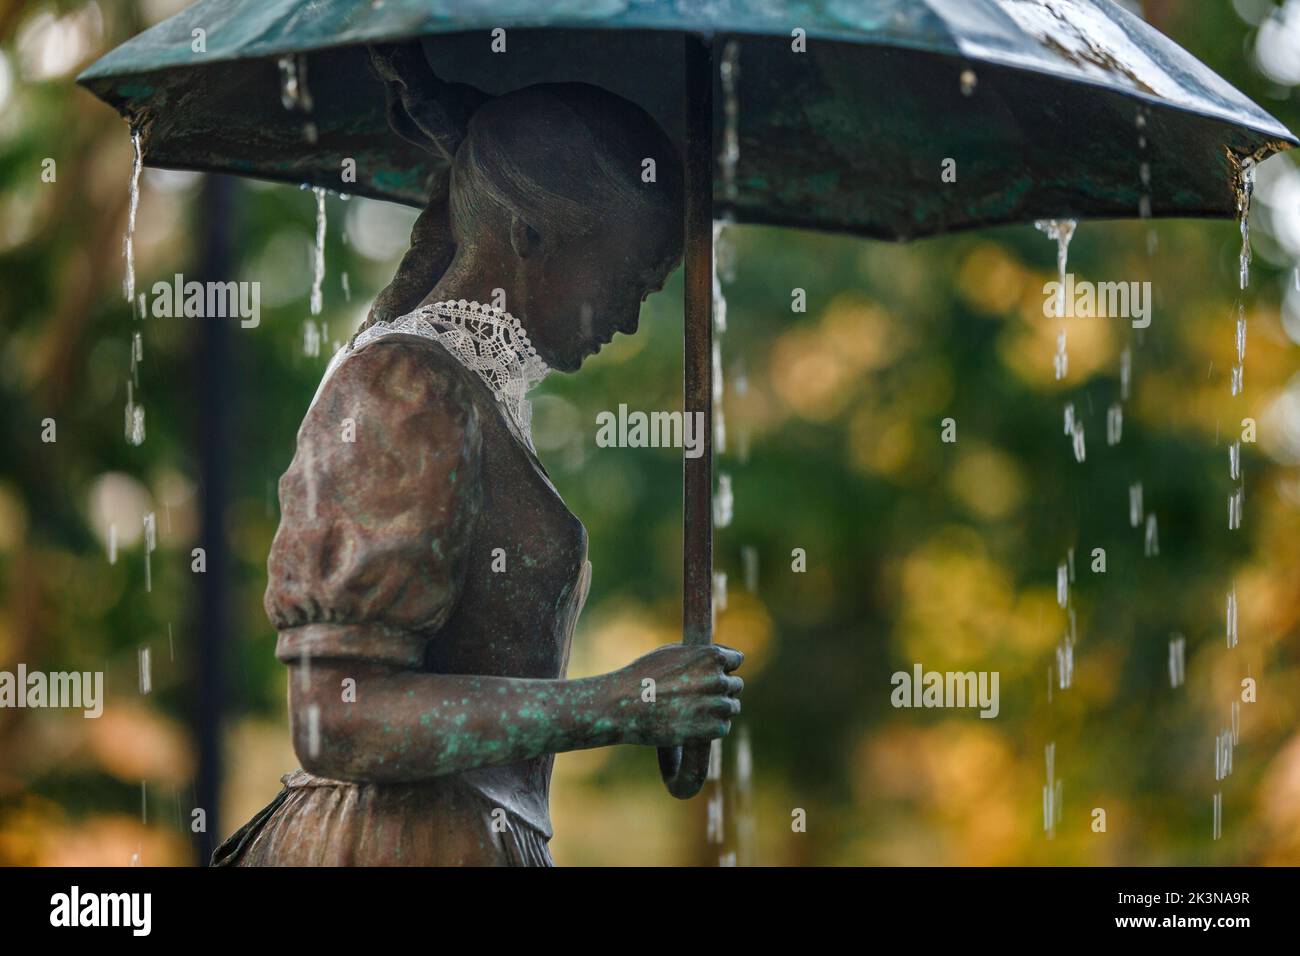 Rain falls on statue of a woman with umbrella and lace collar Stock Photo